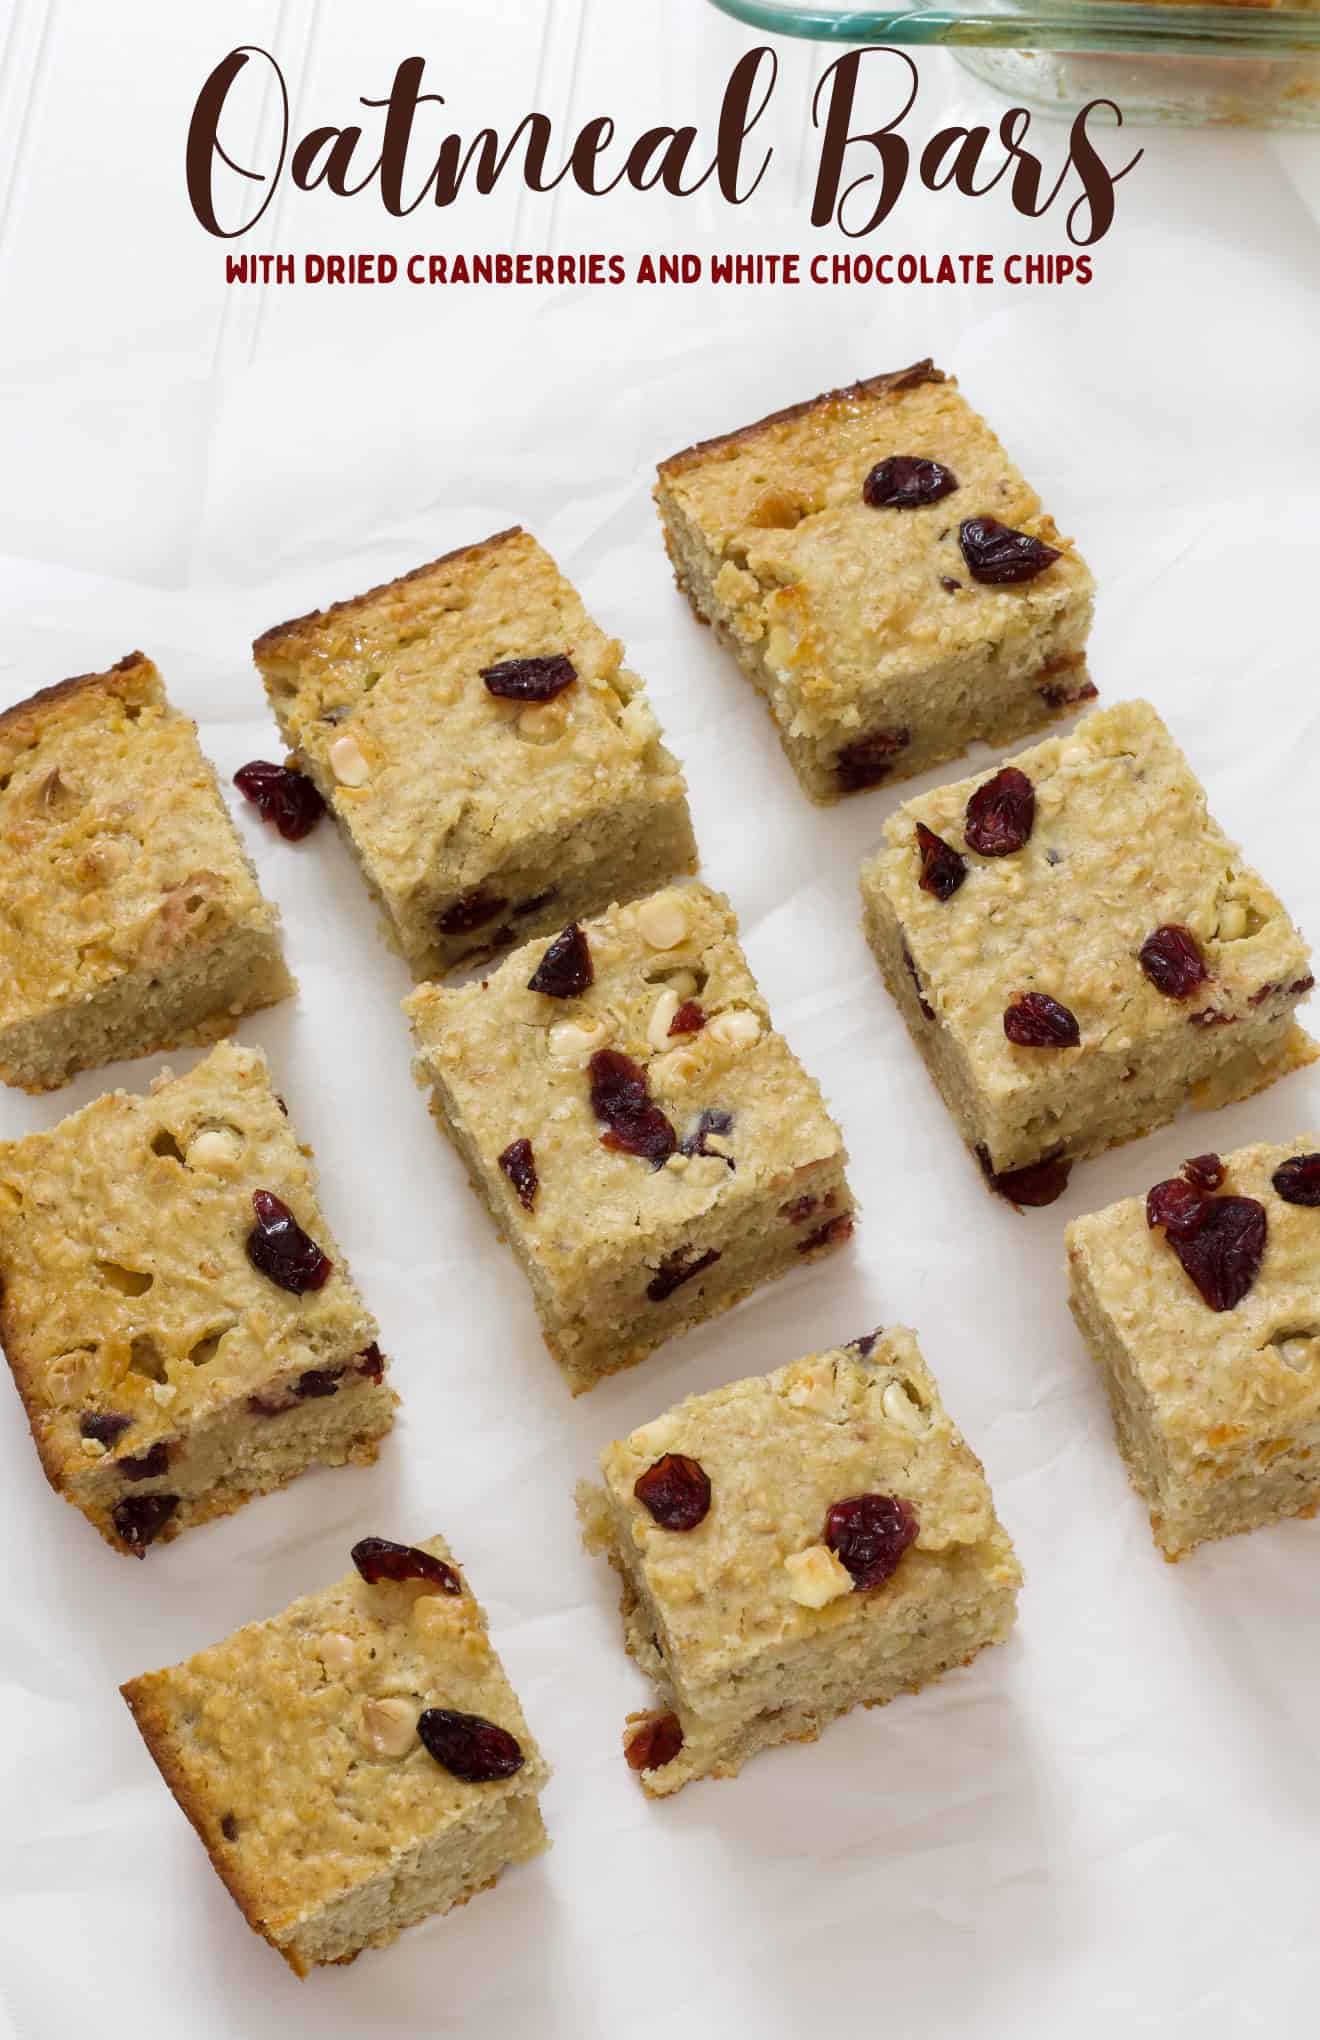 Nine oatmeal bars on white parchment paper with the recipe title written above it.